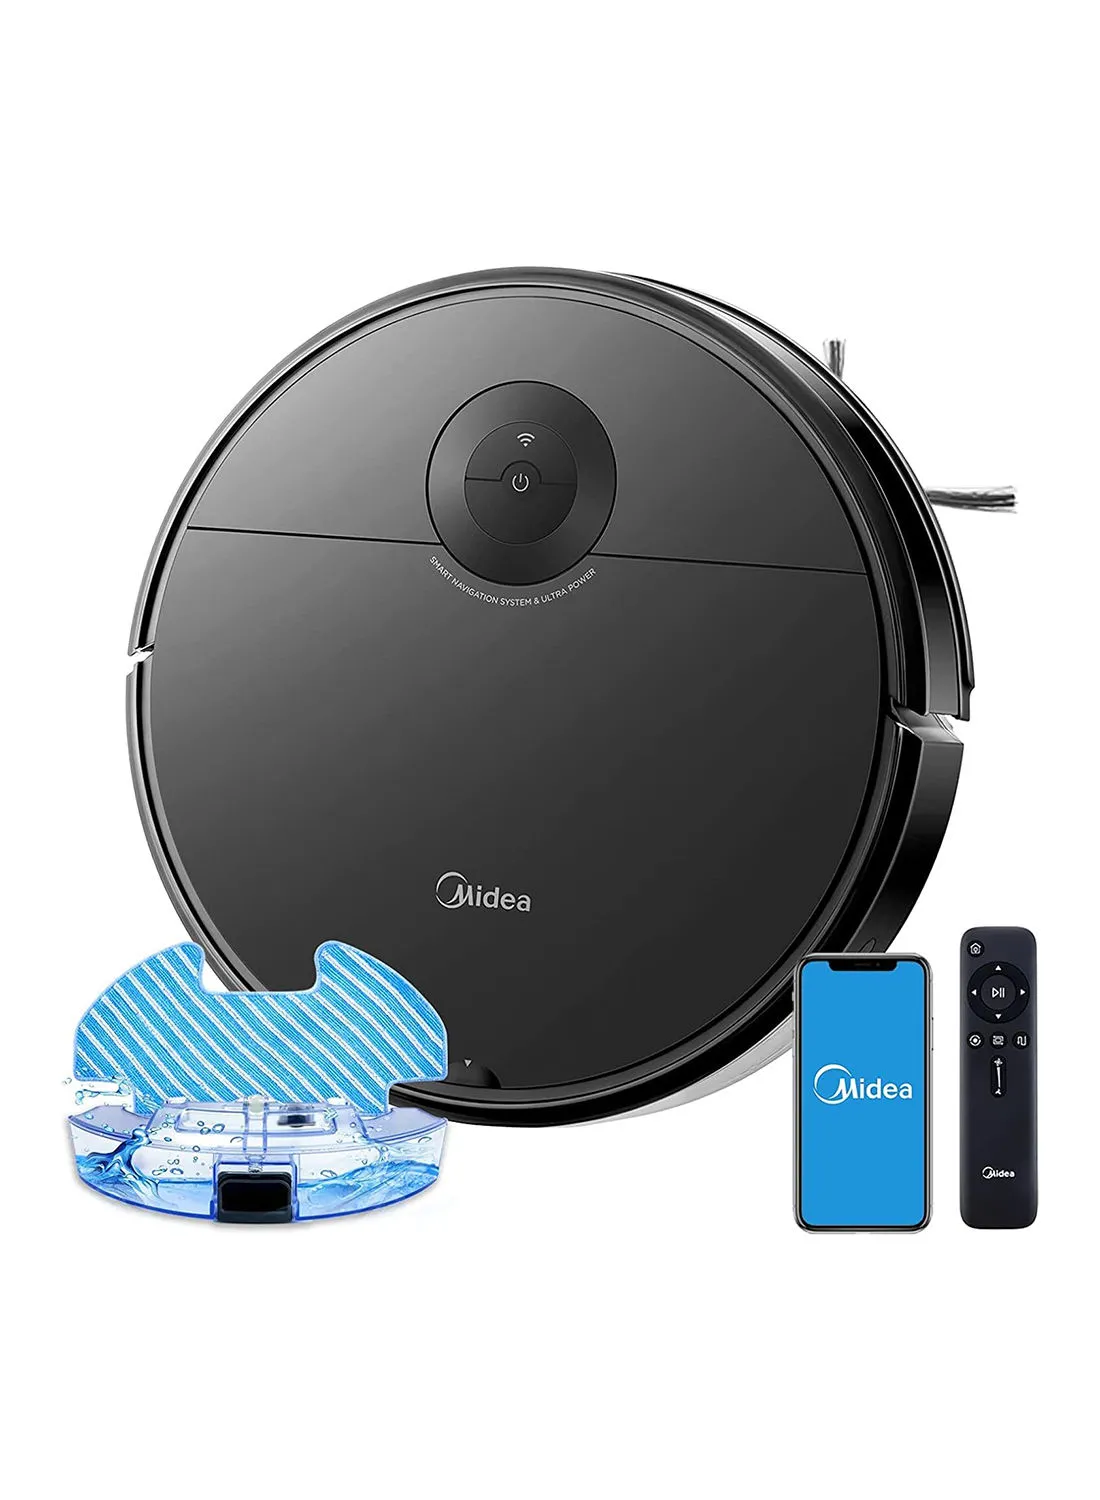 Midea Robot Vacuum cleaner,strong suction with BLDC motor, Sweep and Wet Mopping, 3 level to choose, Wi-Fi App & Voice Control with Msmartlife, Several cleaning modes, 2600mah battery 240 W I5C Black